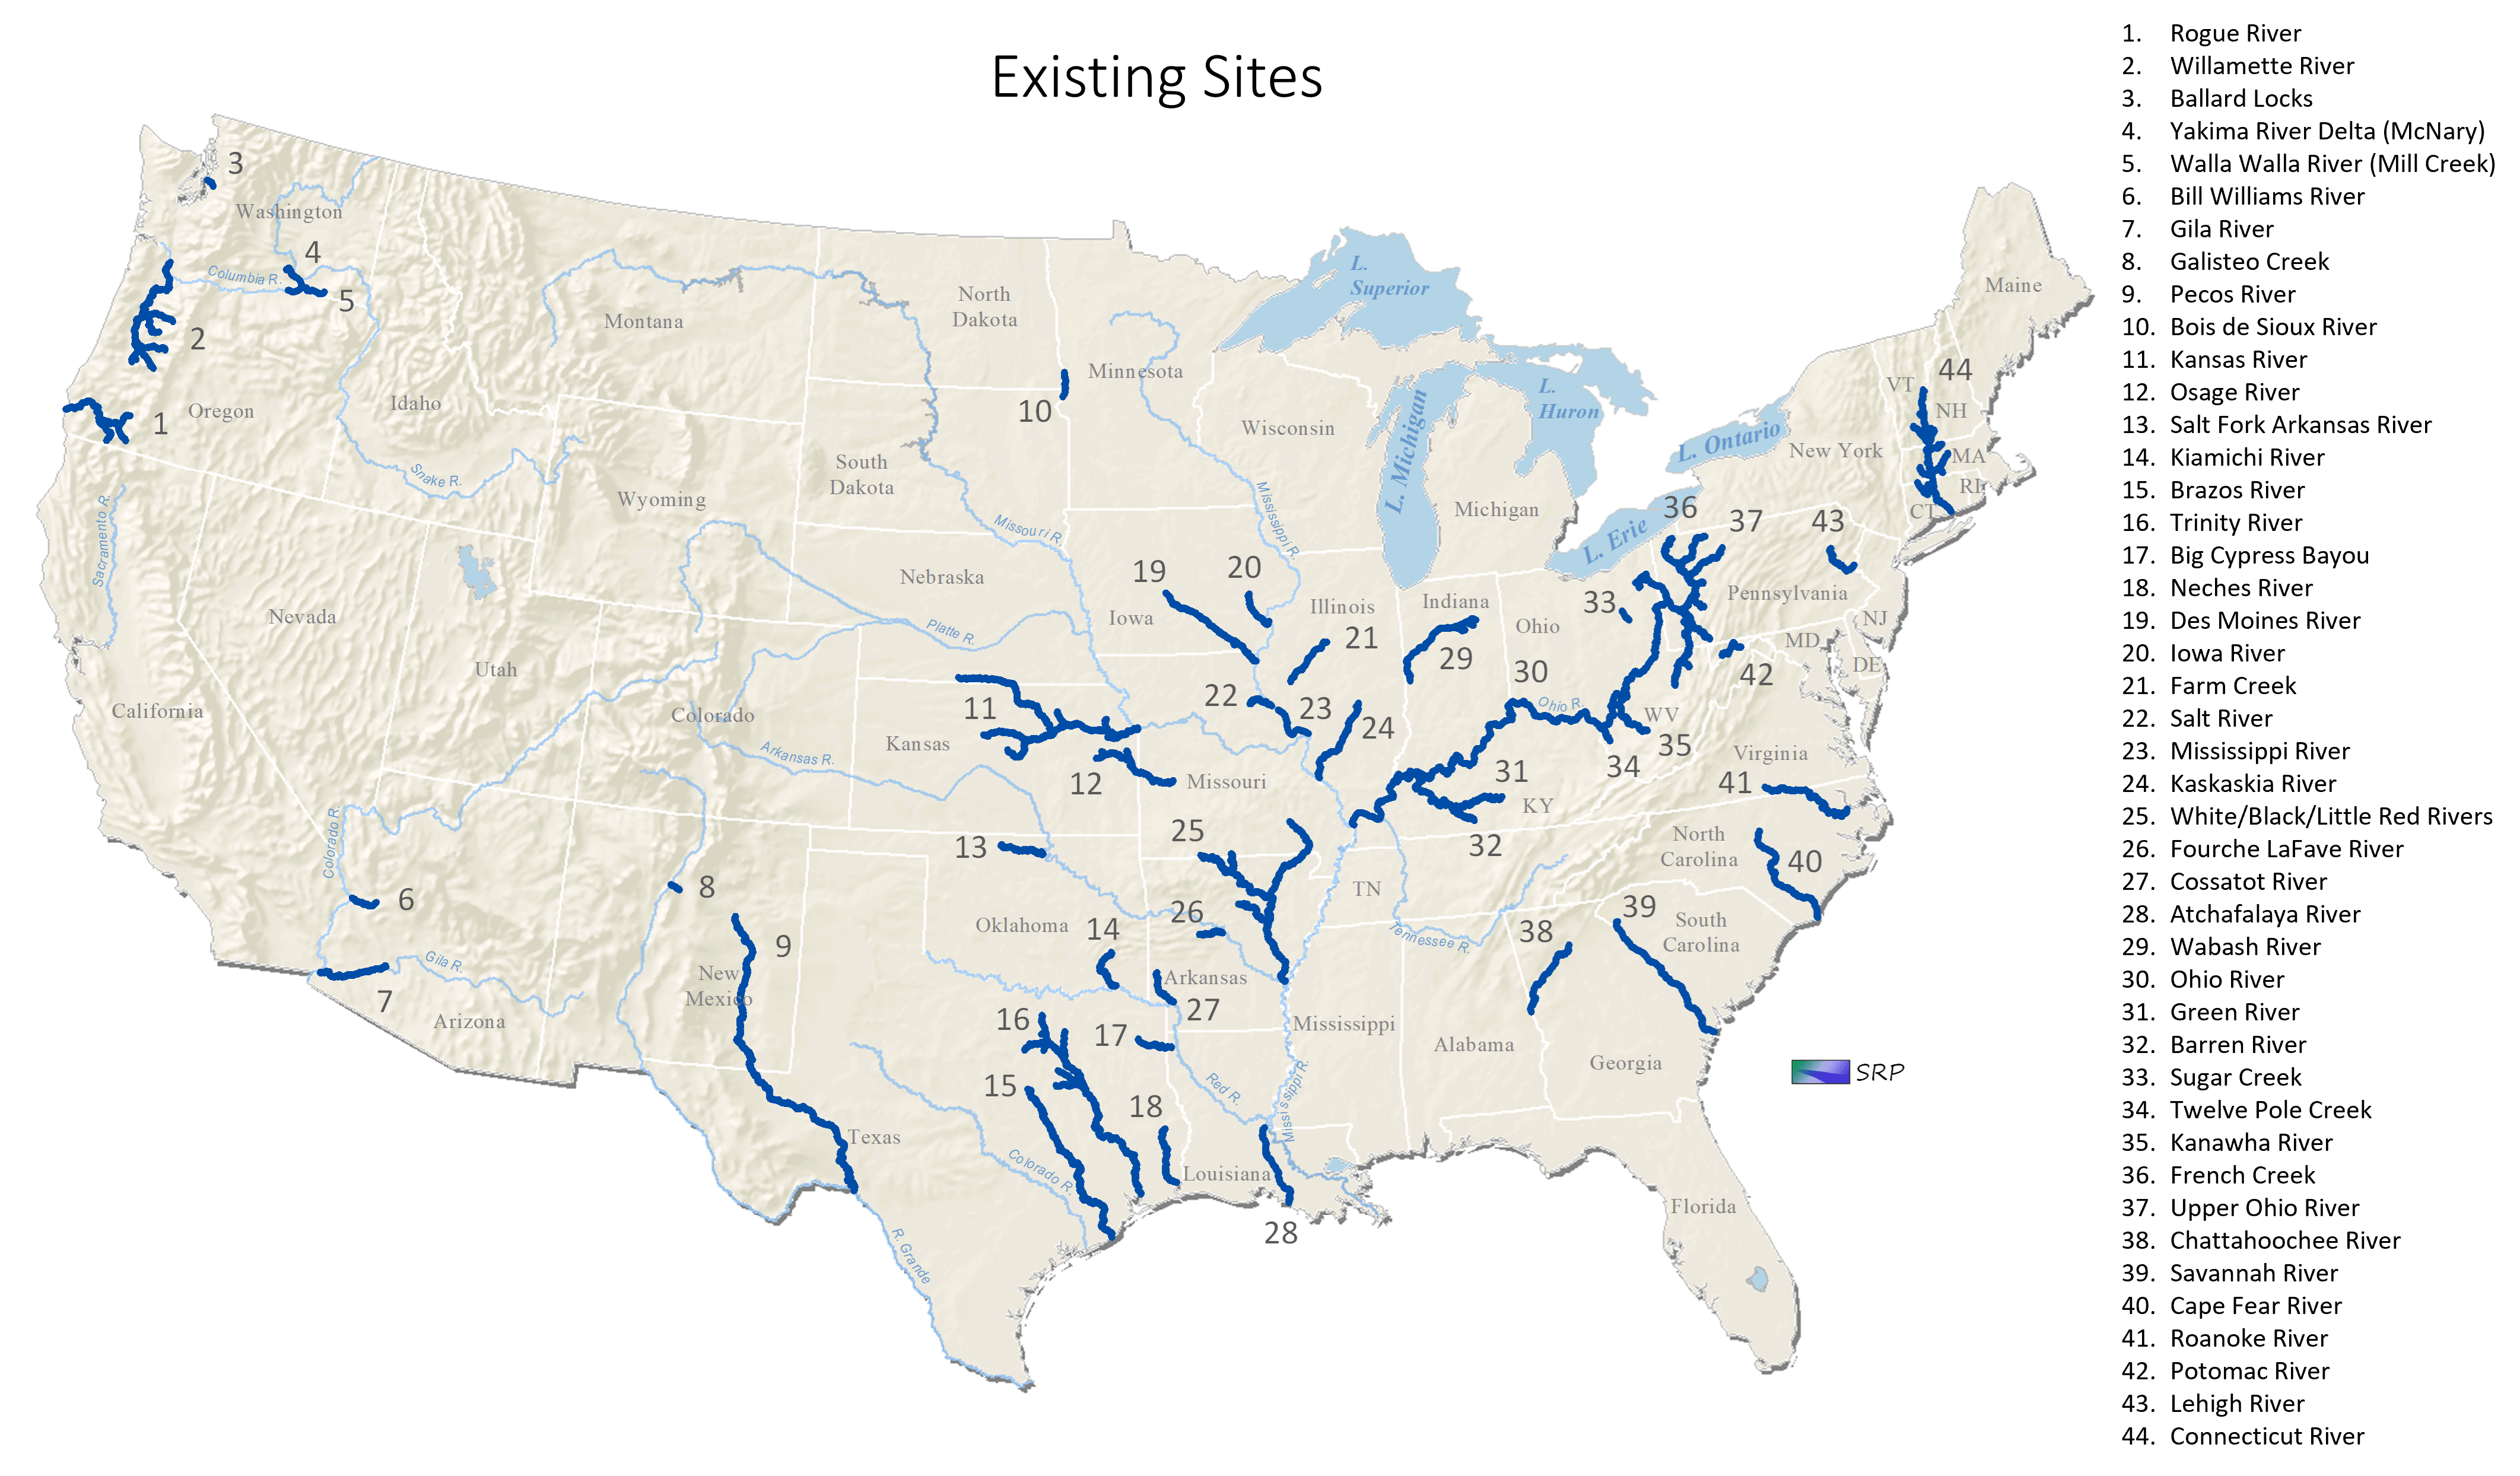 Sustainable Rivers is an ongoing national program to increase environmental benefits provided by Corps already built water resources projects. Sustainable Rivers involves work on Corps infrastructure in more than 44 river systems and 12,069 river miles.